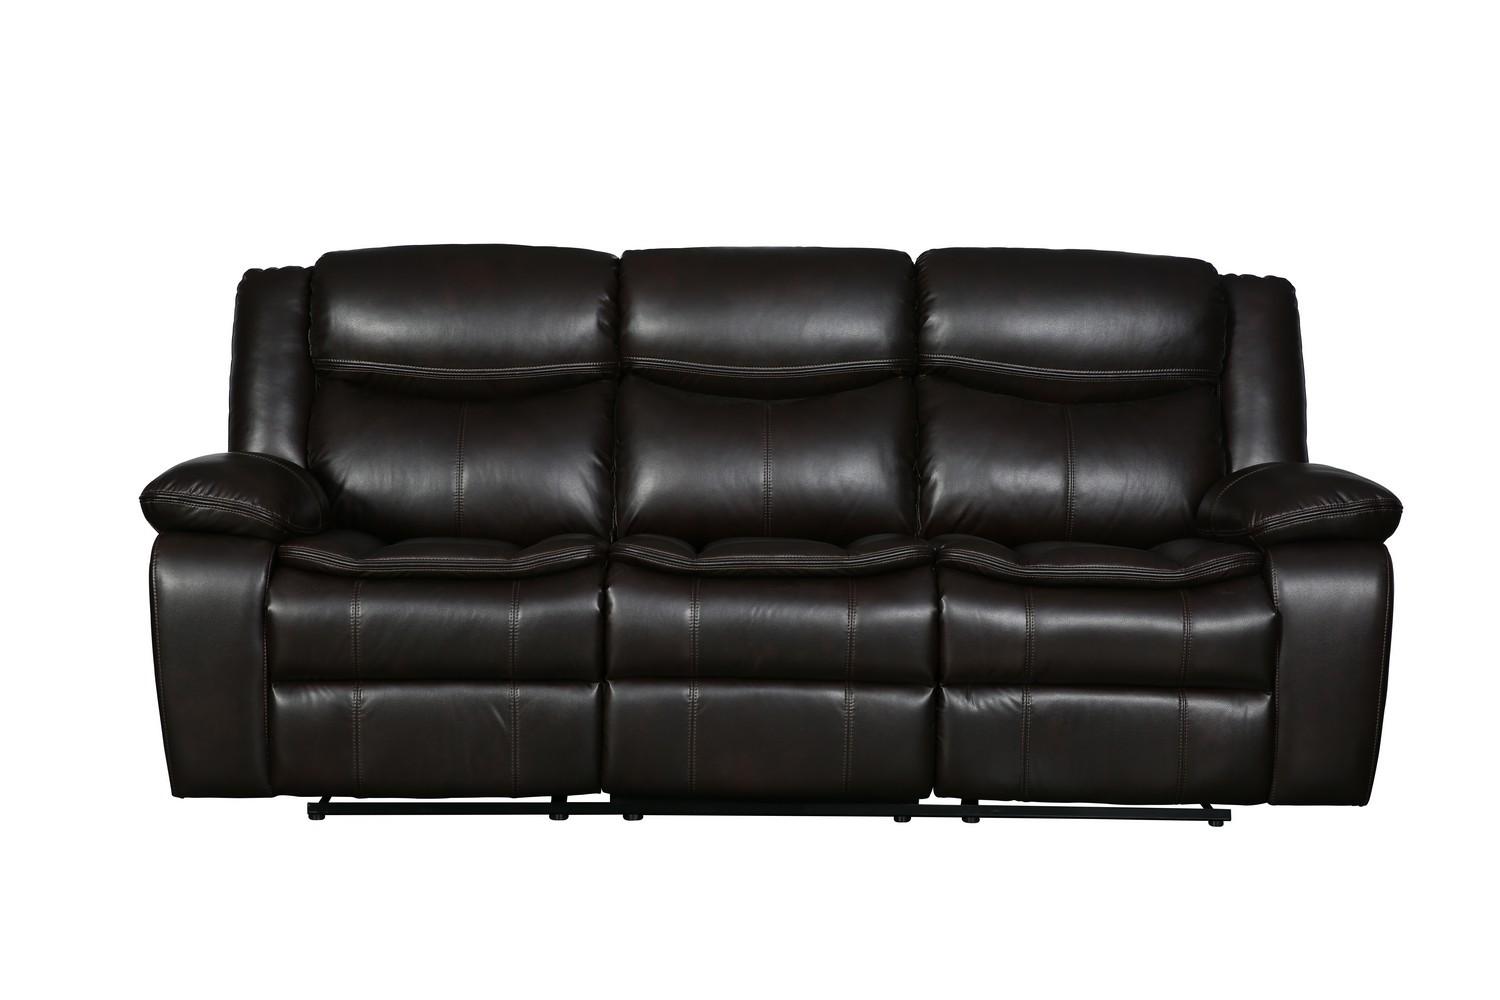 

    
Contemporary Brown Leather Air Reclining Sofa Global United 6967 6967-BROWN-S
